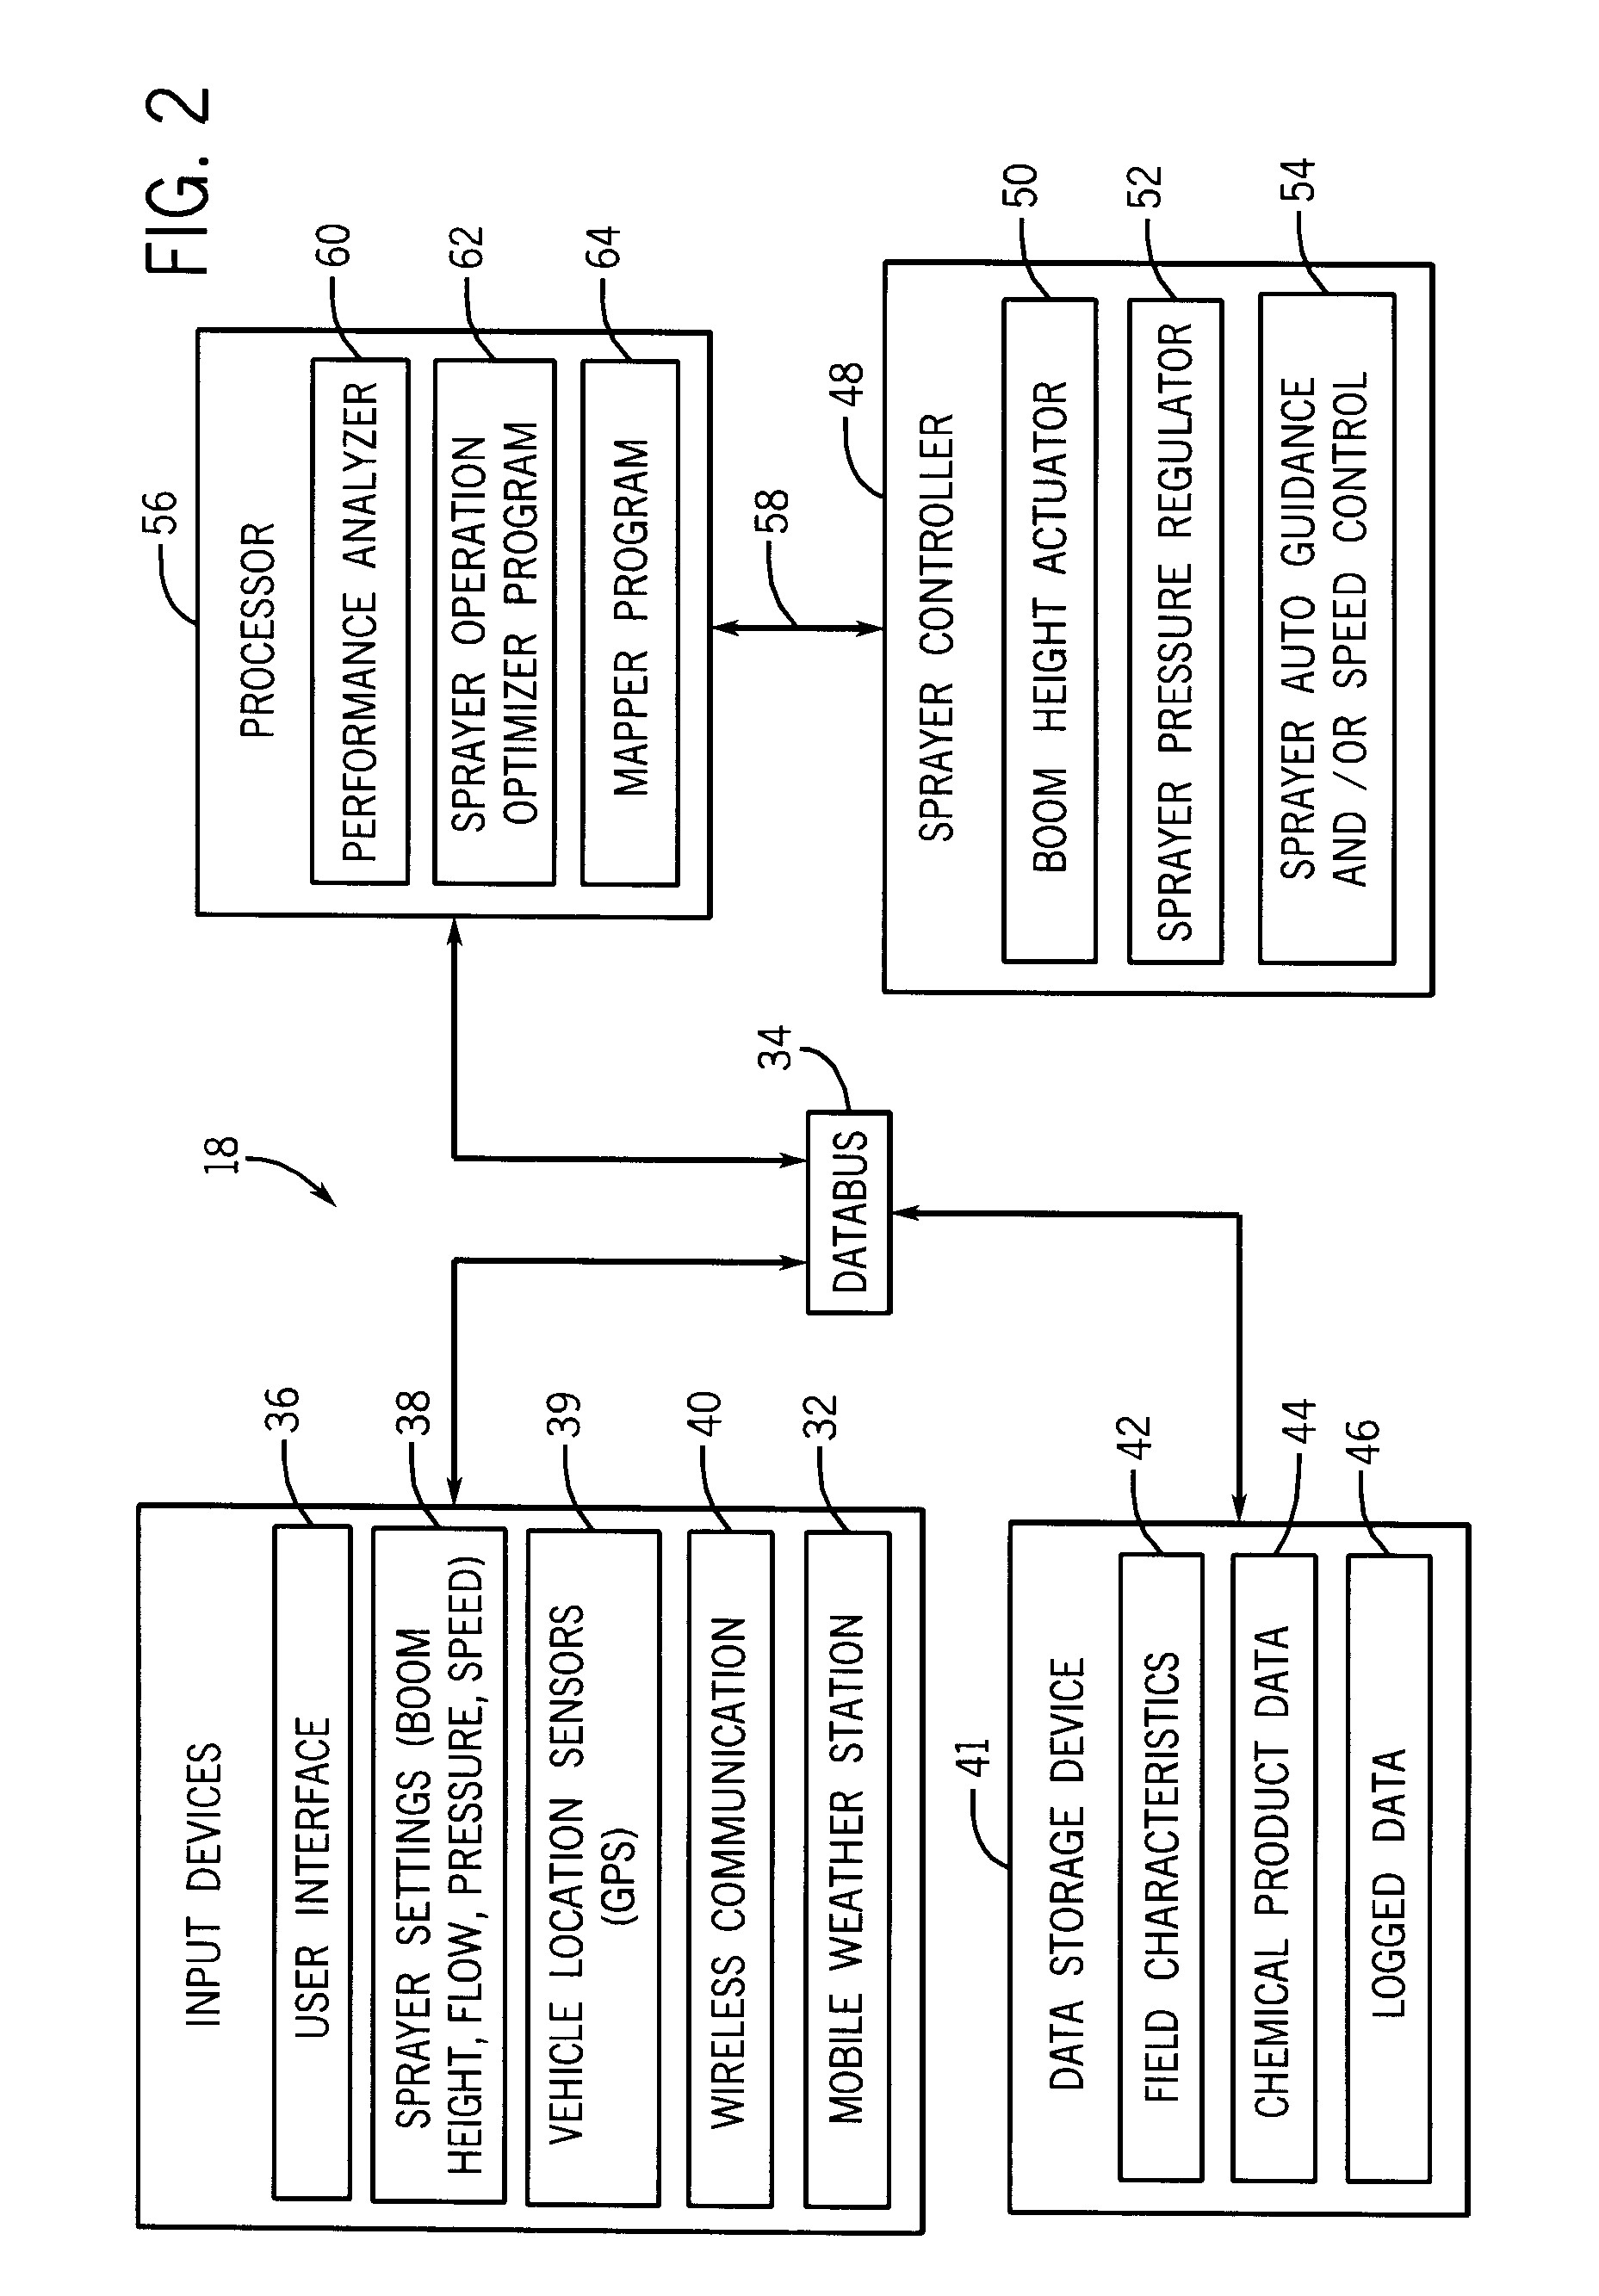 Method and apparatus for optimization of agricultural field operations using weather, product and environmental information